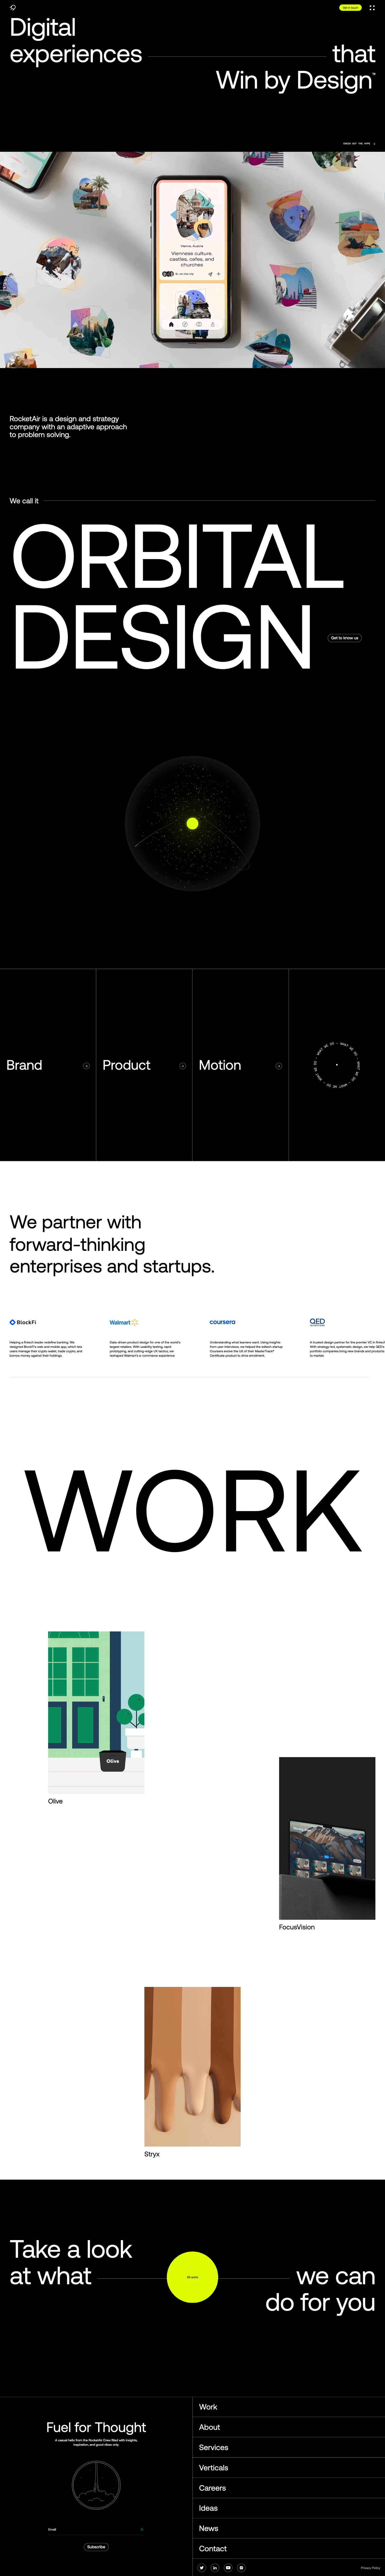 RocketAir Landing Page Example: RocketAir is a design and strategy company that specializes in brand, product, and motion. Our global team is dedicated to bringing heart and humanity to digital experiences.